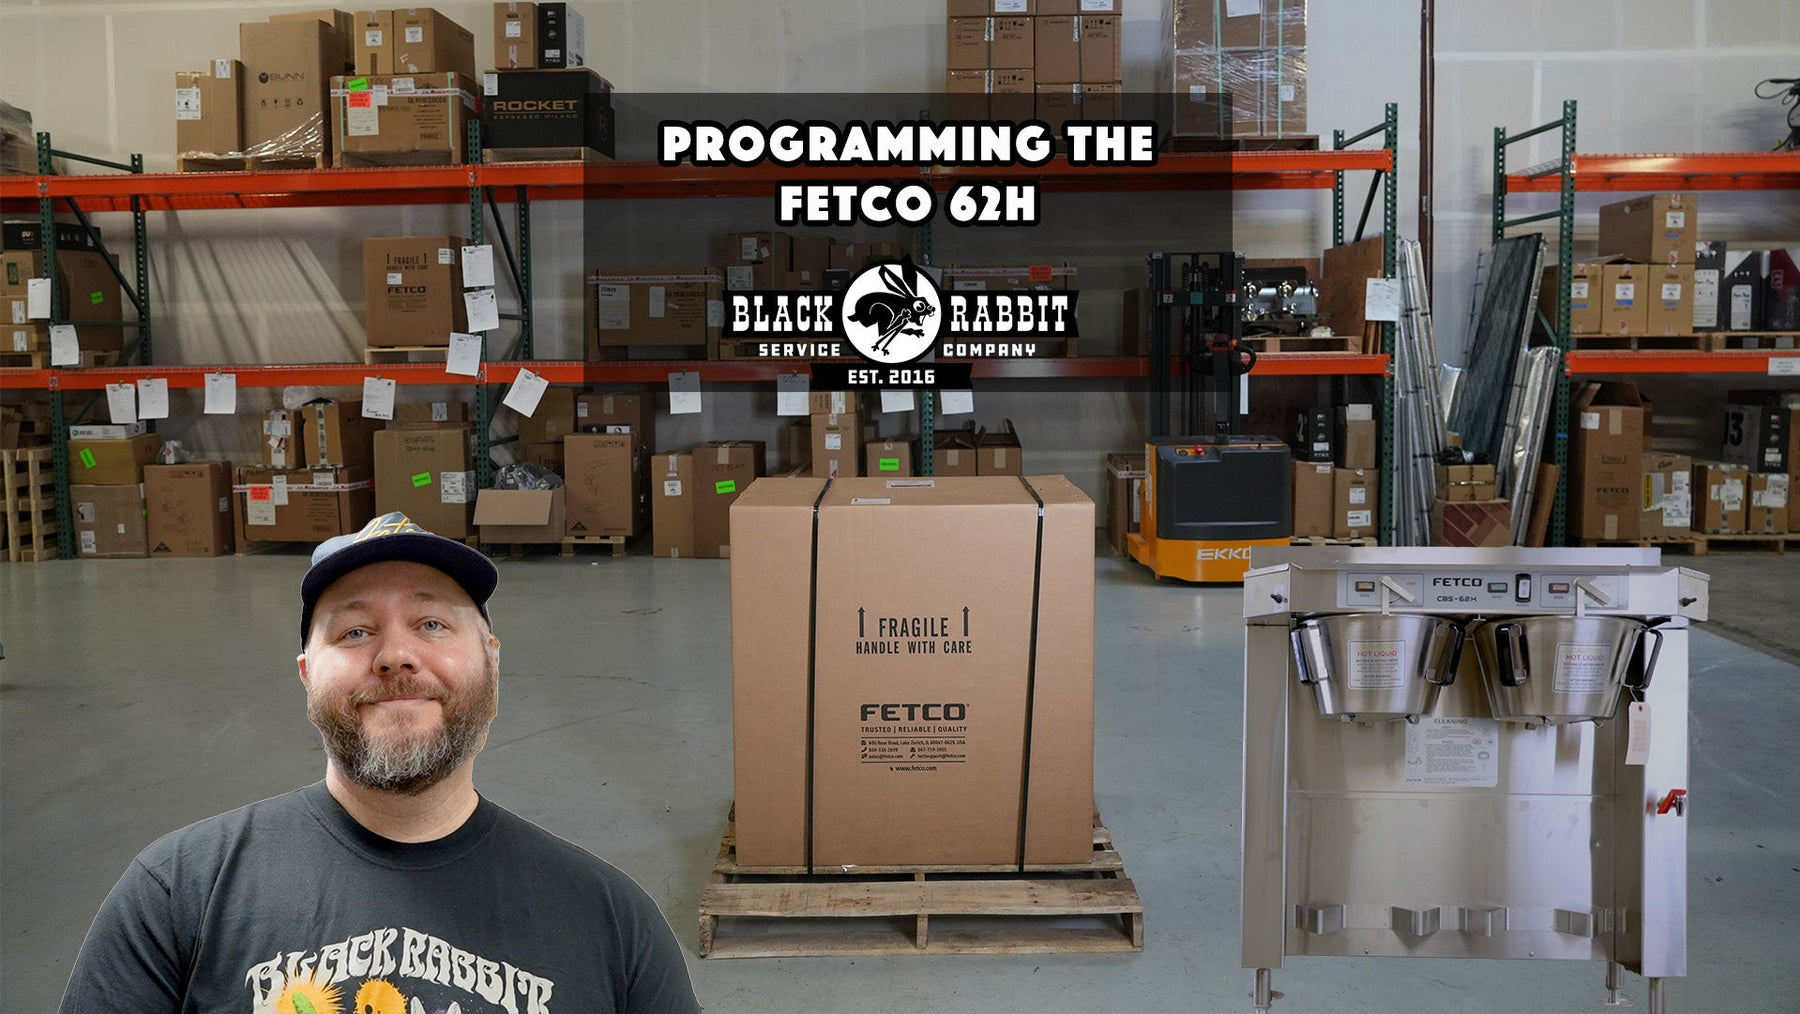 How to Program the Fetco 62H Brewer - Black Rabbit Service Co.